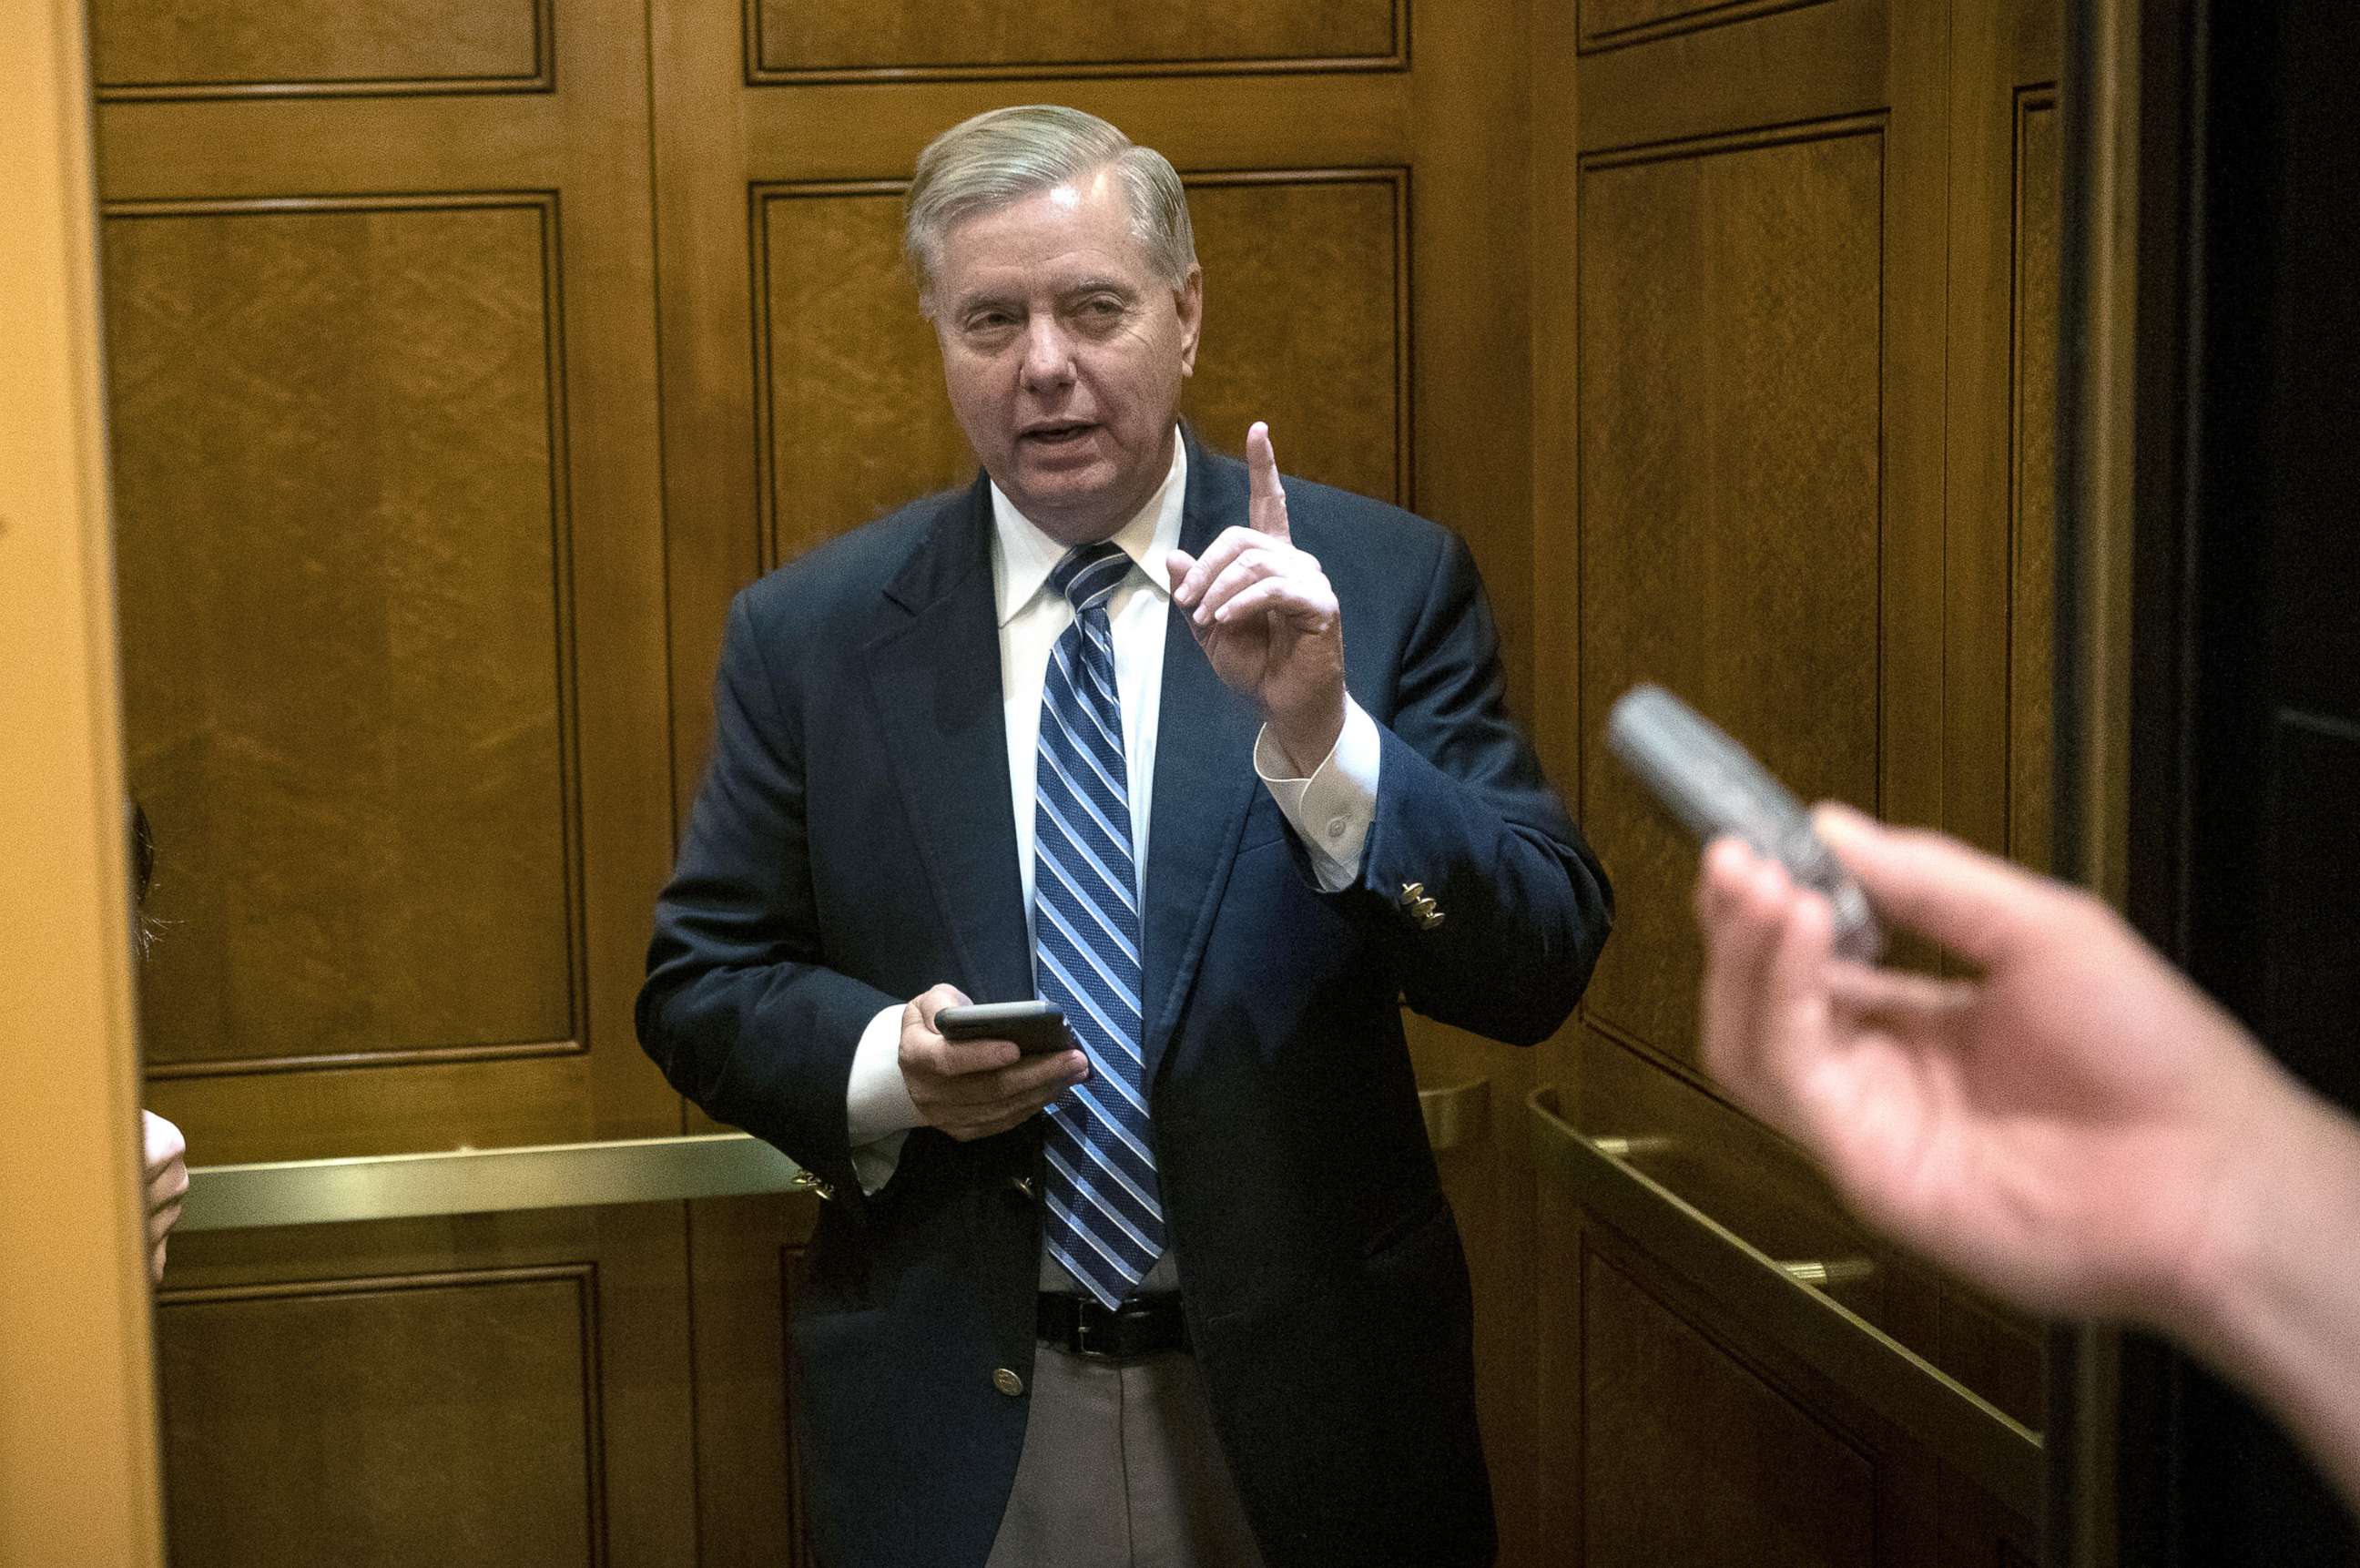 PHOTO: Senator Lindsey Graham (R-SC) talks with reporters as he walks through the Senate Subway to vote at the Capitol, Nov. 21, 2019.